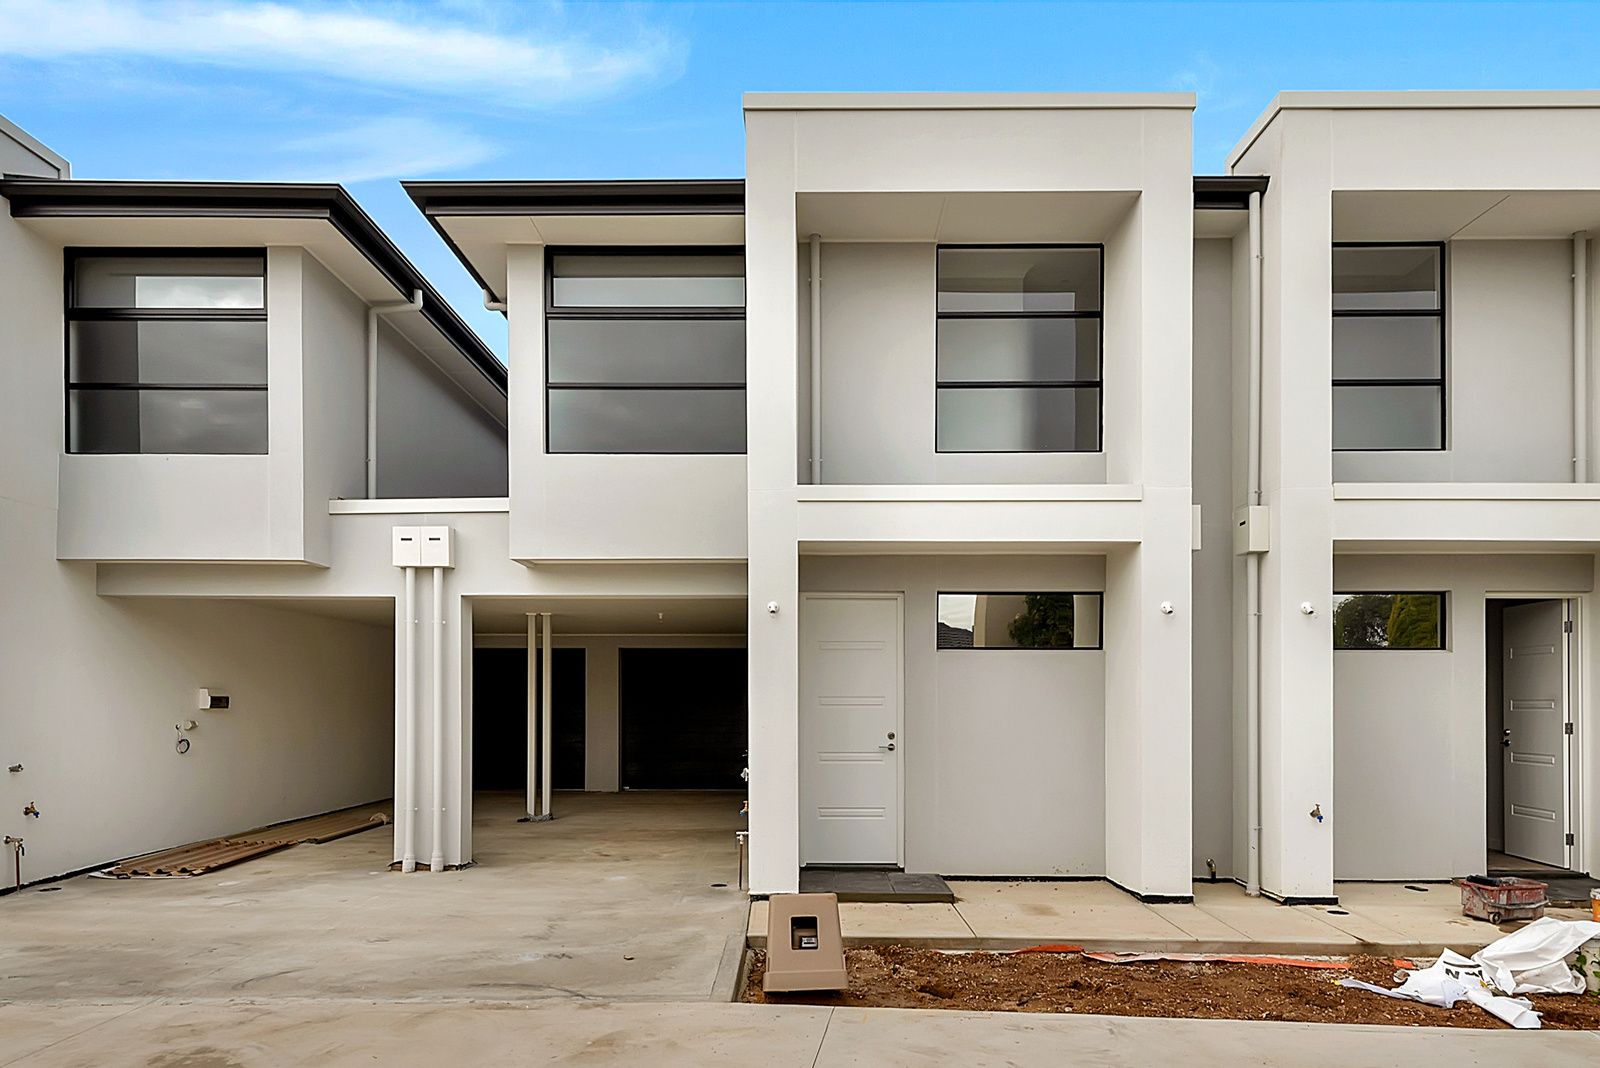 2/11 Willow Crescent, Campbelltown SA 5074, Image 0